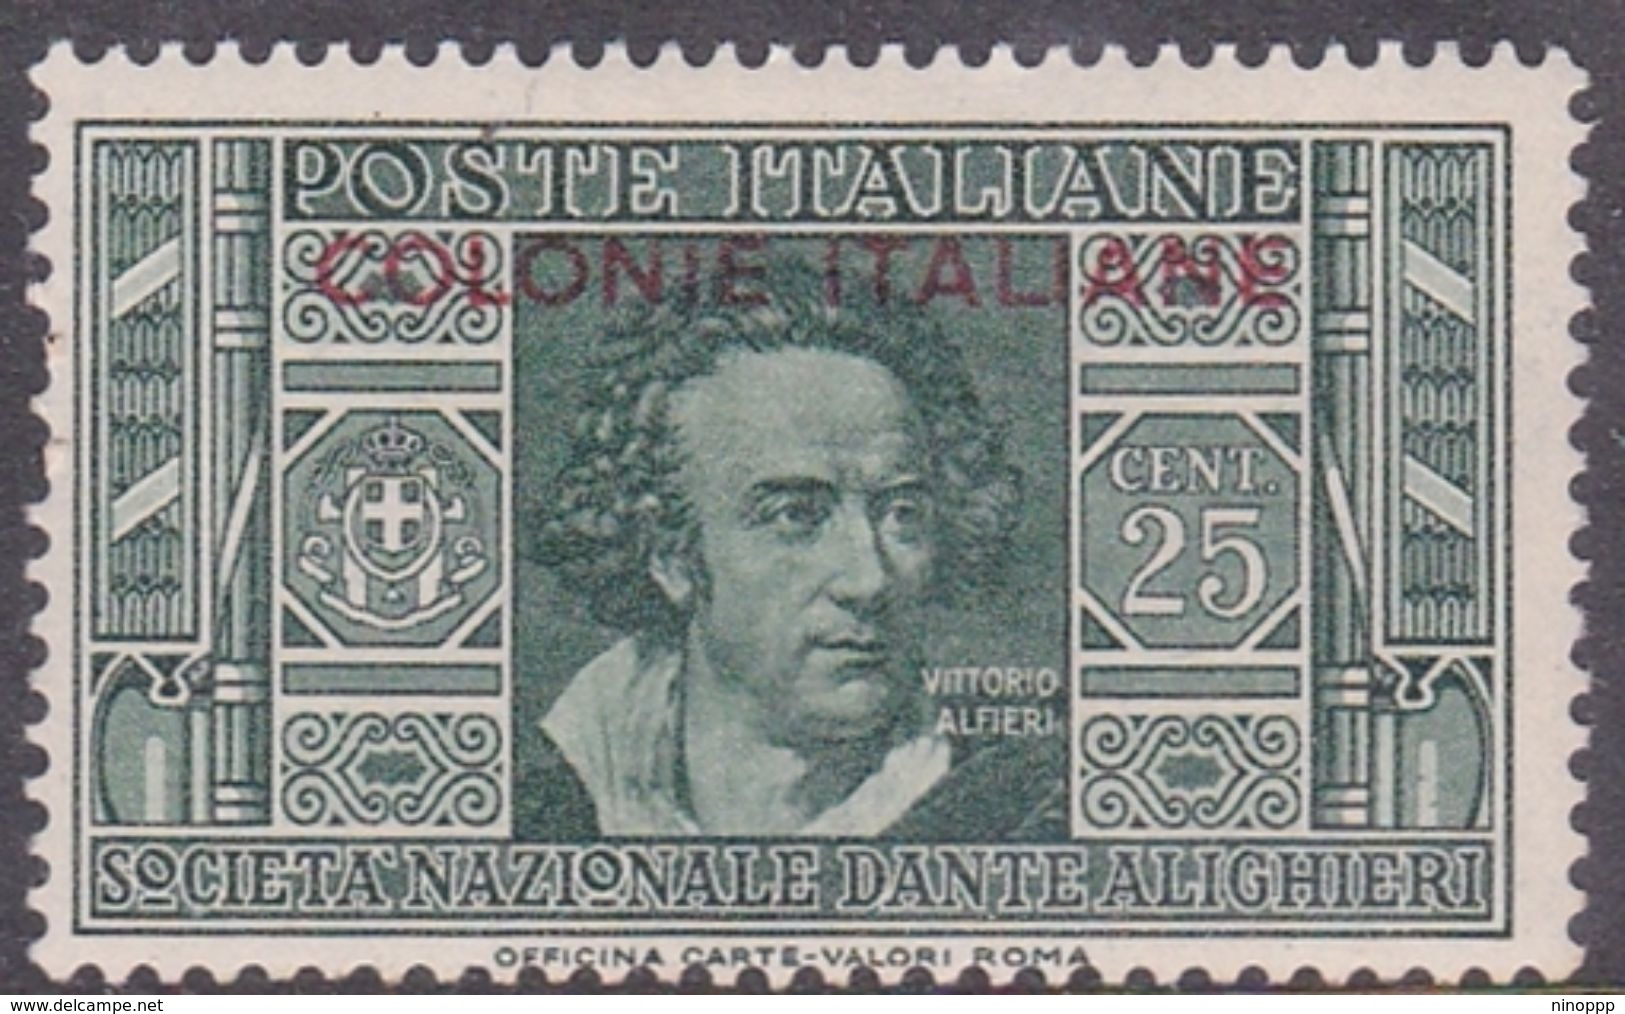 Italy-Colonies And Territories-General Issue S14 1932 Dante Alighieri 25c Green MH - General Issues